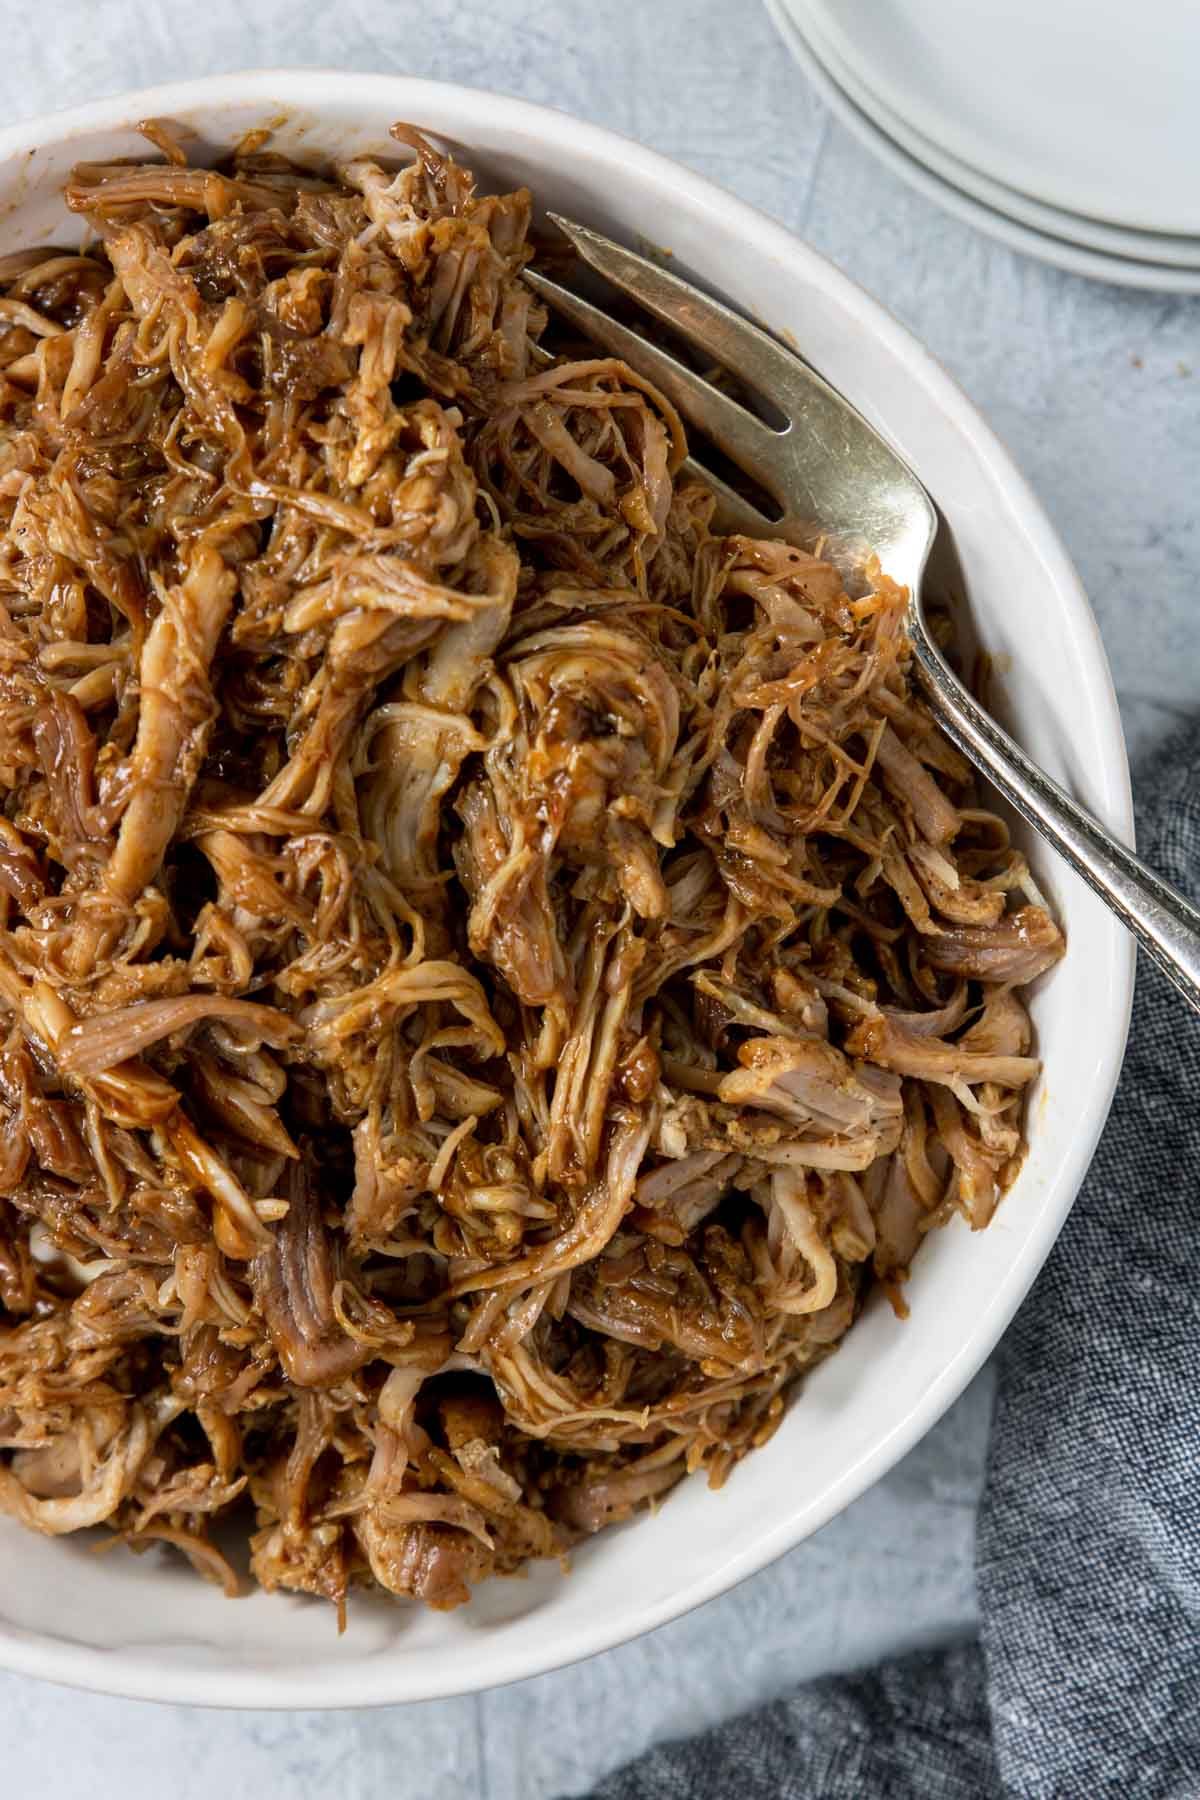 Pulled pork tossed with bbq sauce